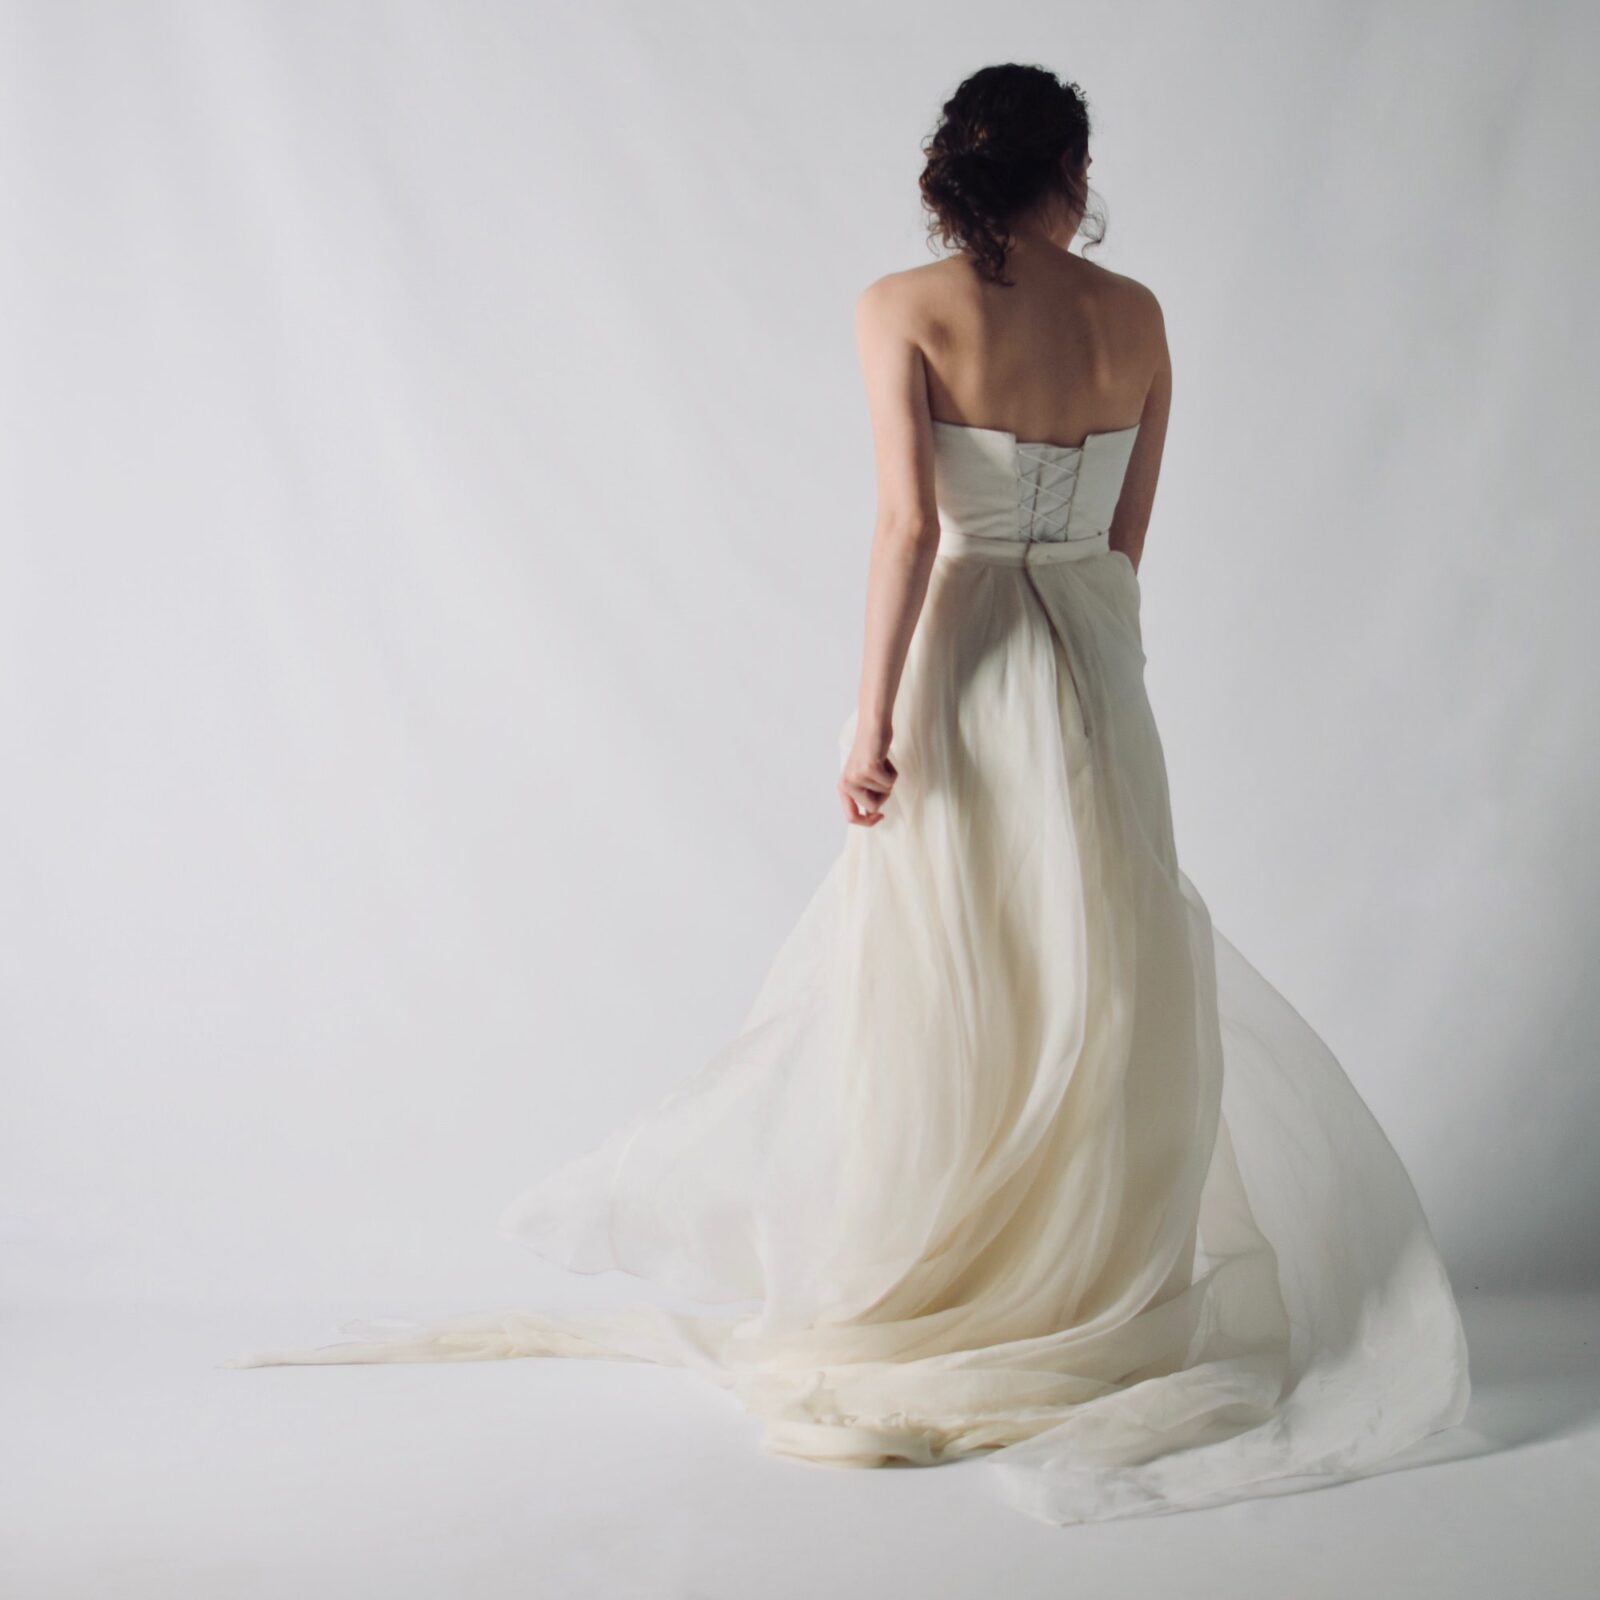 Strapless wedding dress outfit | Larimeloom | Bridal Collection